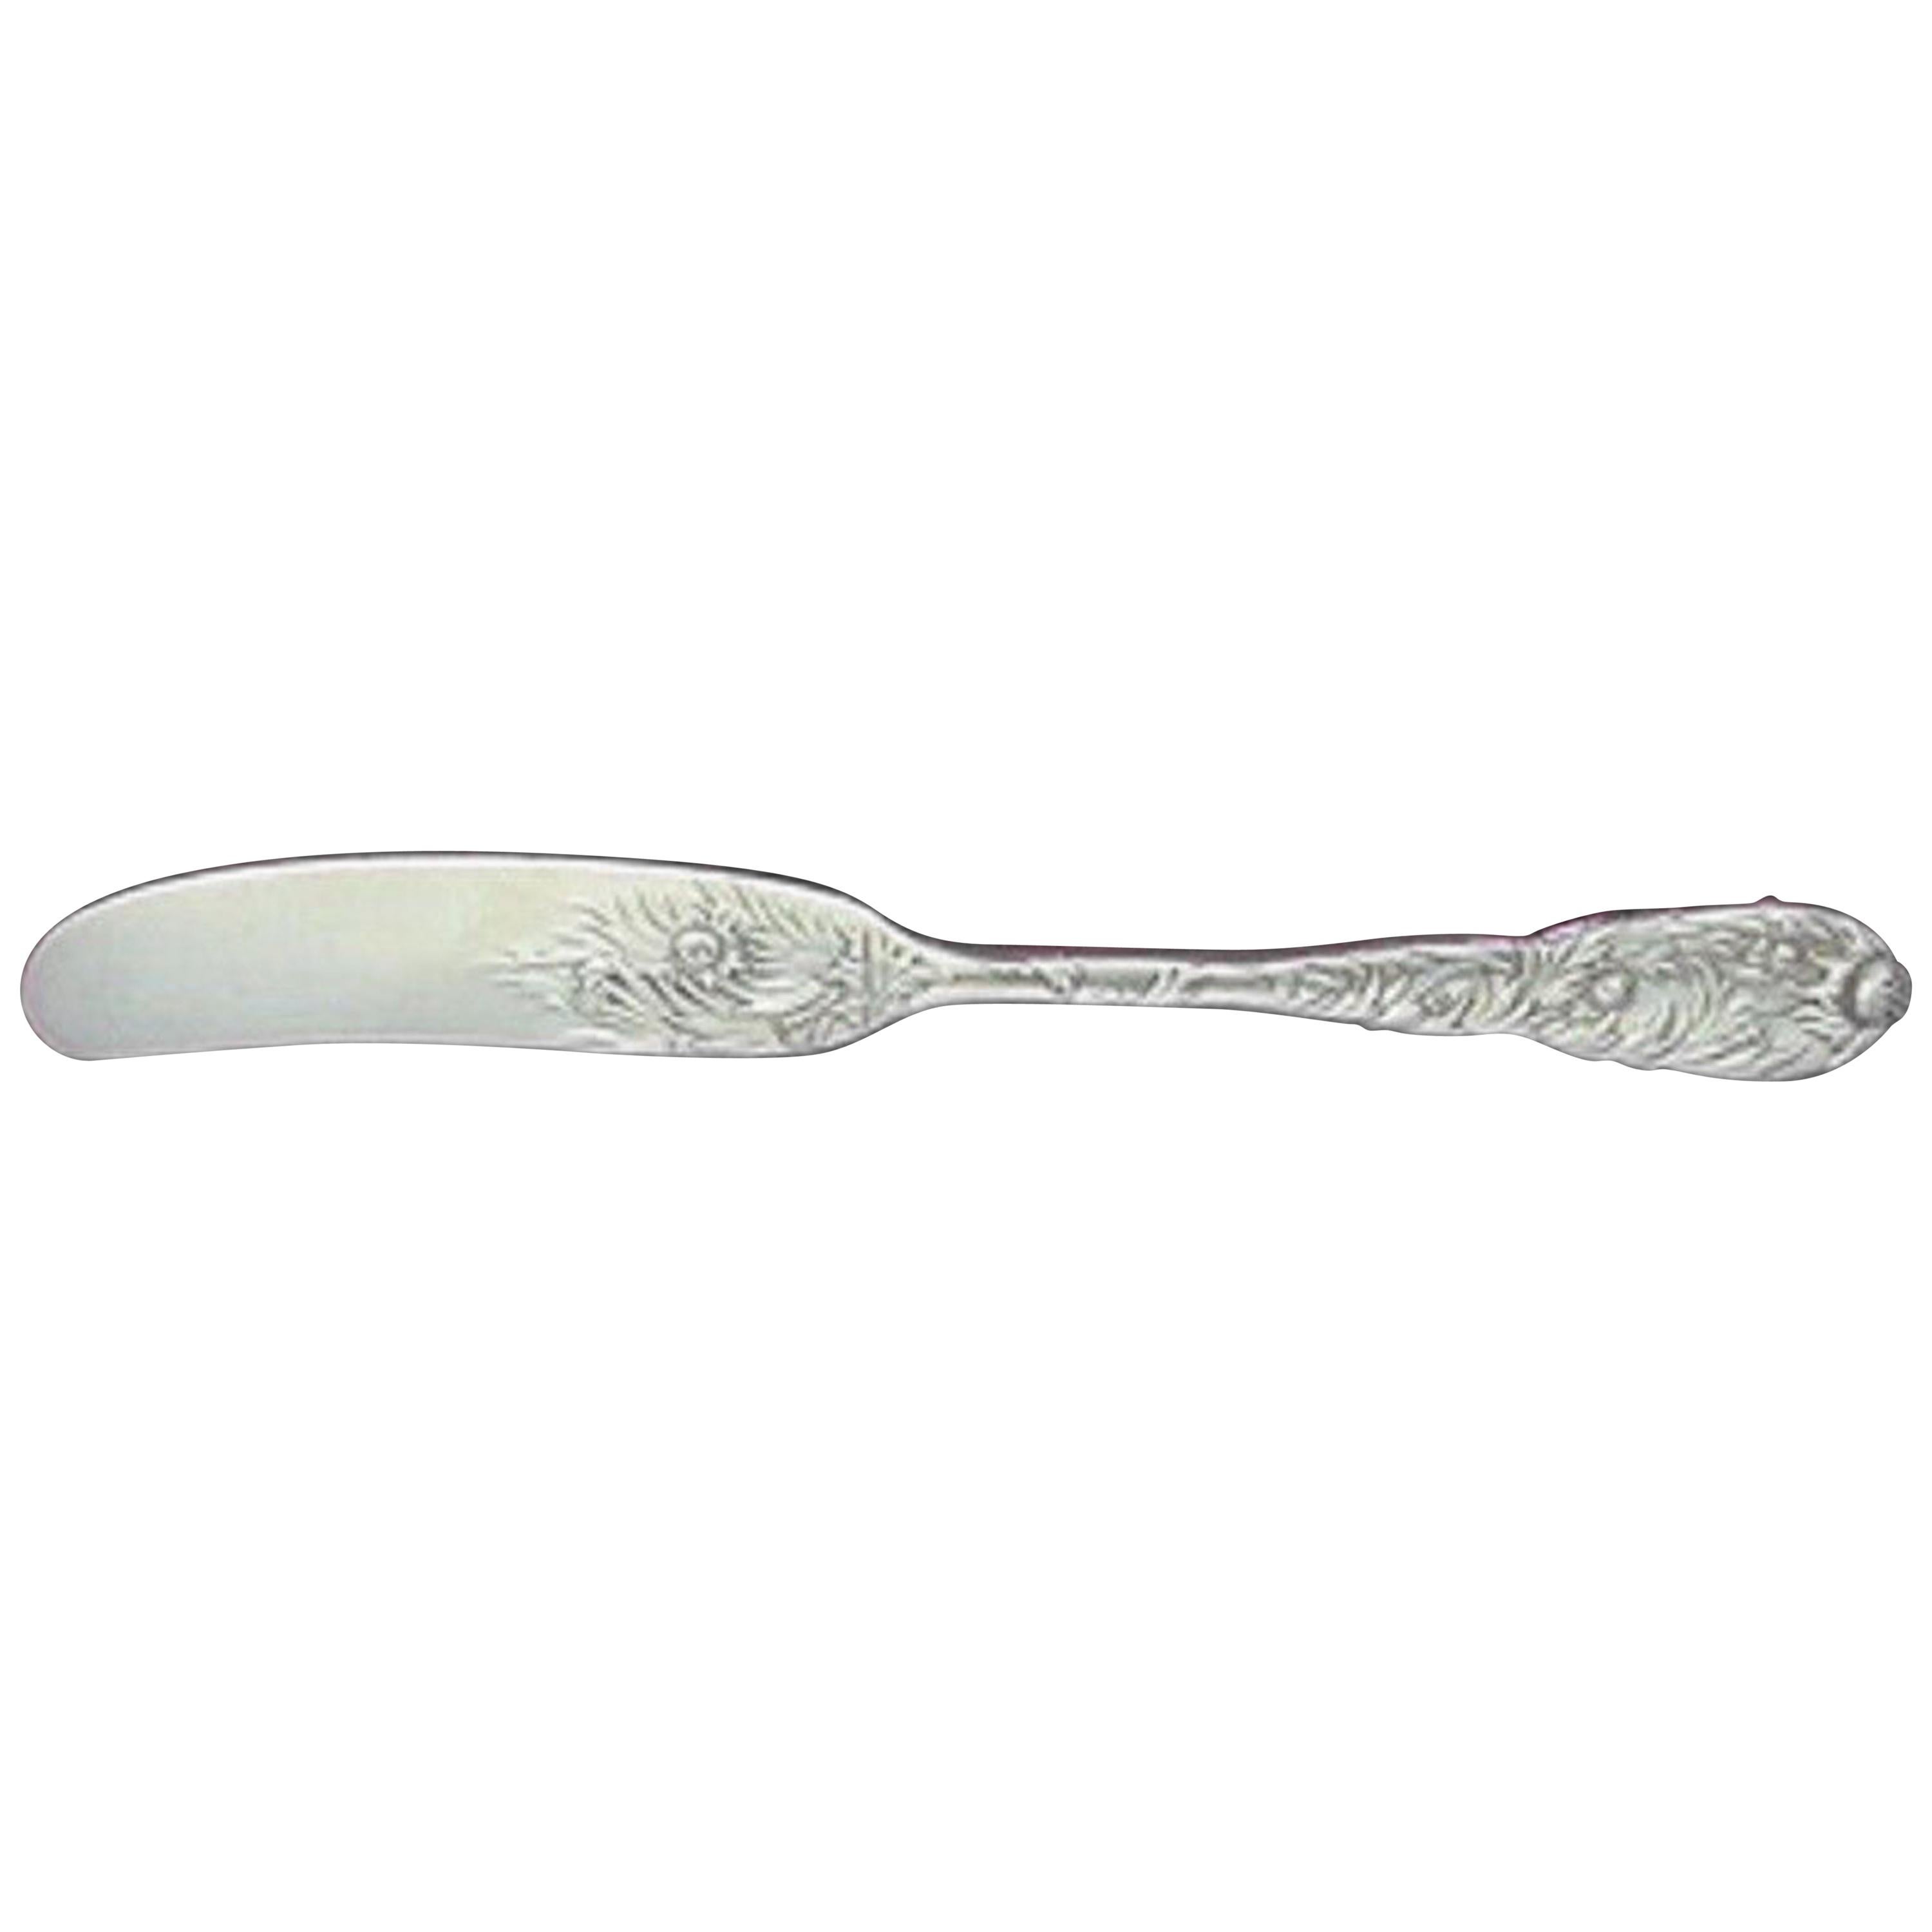 Chrysanthemum by Tiffany Sterling Silver Butter Spreader FH with Flowers